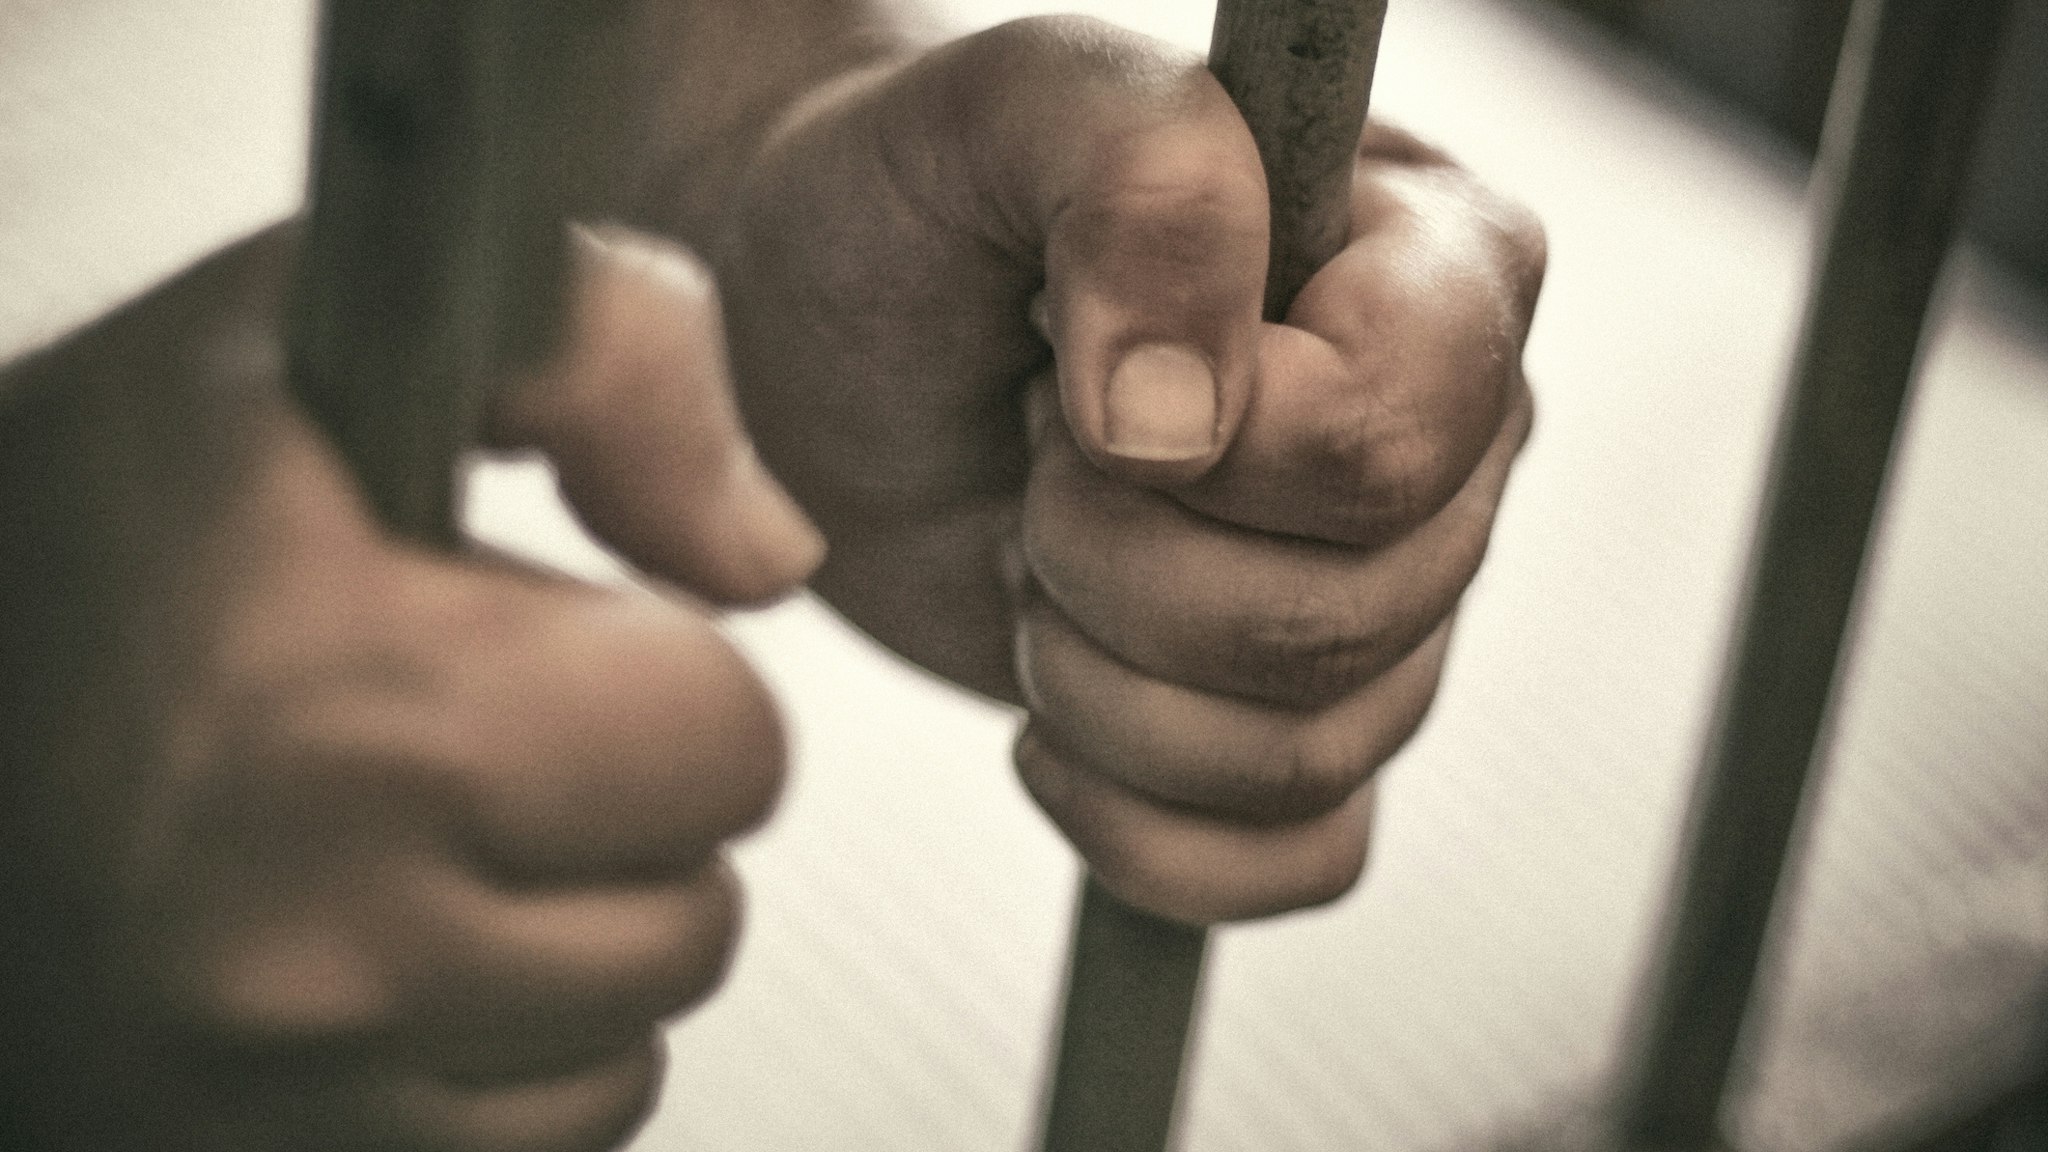 Man's hands tightly holding the bars of his jail cell.